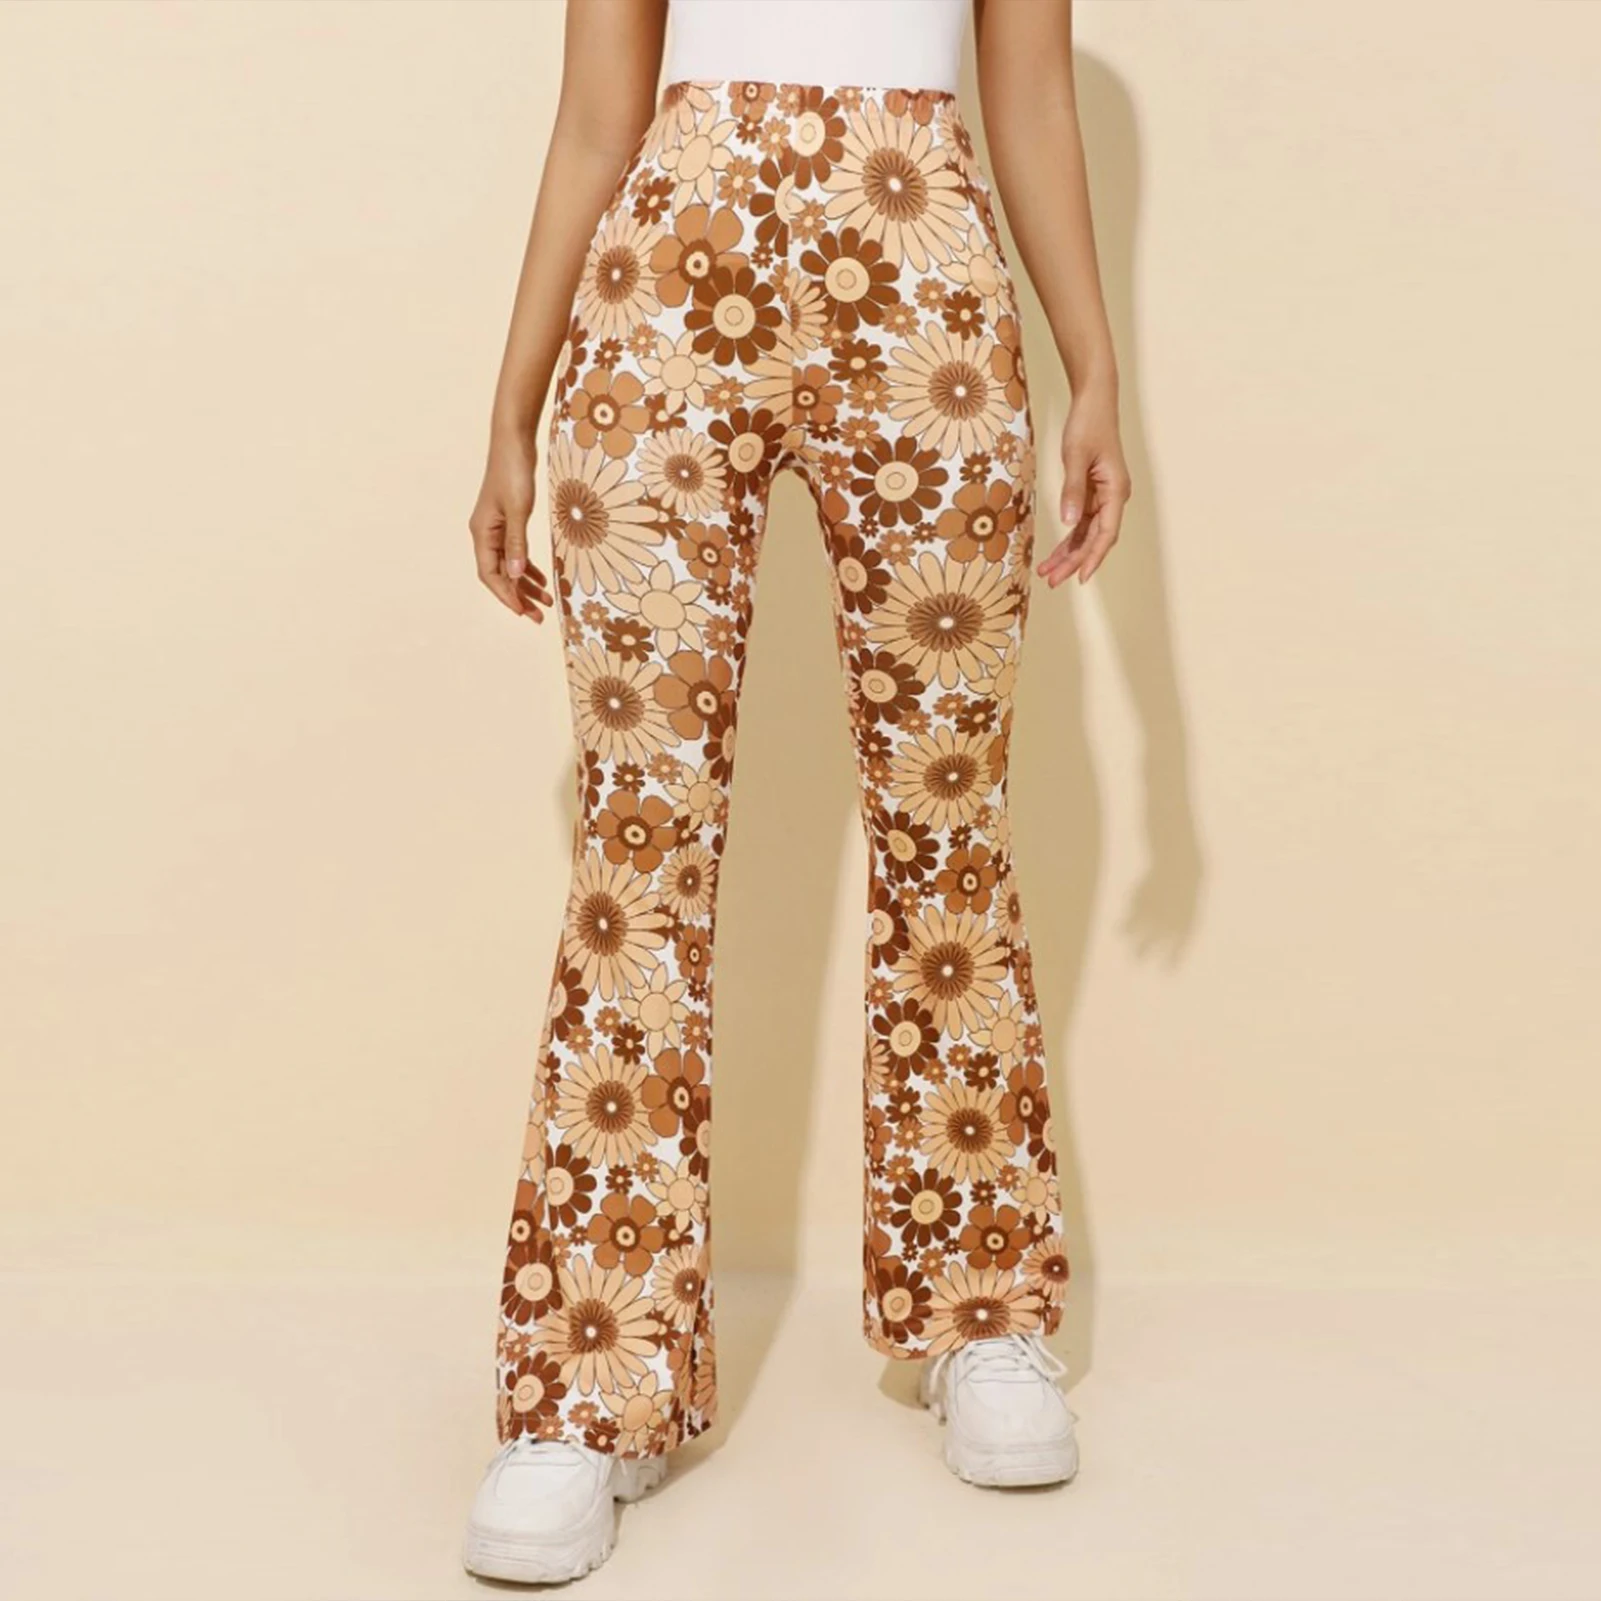 Retro Floral Printed Women Flared Pants Summer 2023 Fashion High Waisted Slim Trousers Ladies Casual Tight Pants Streetwear New